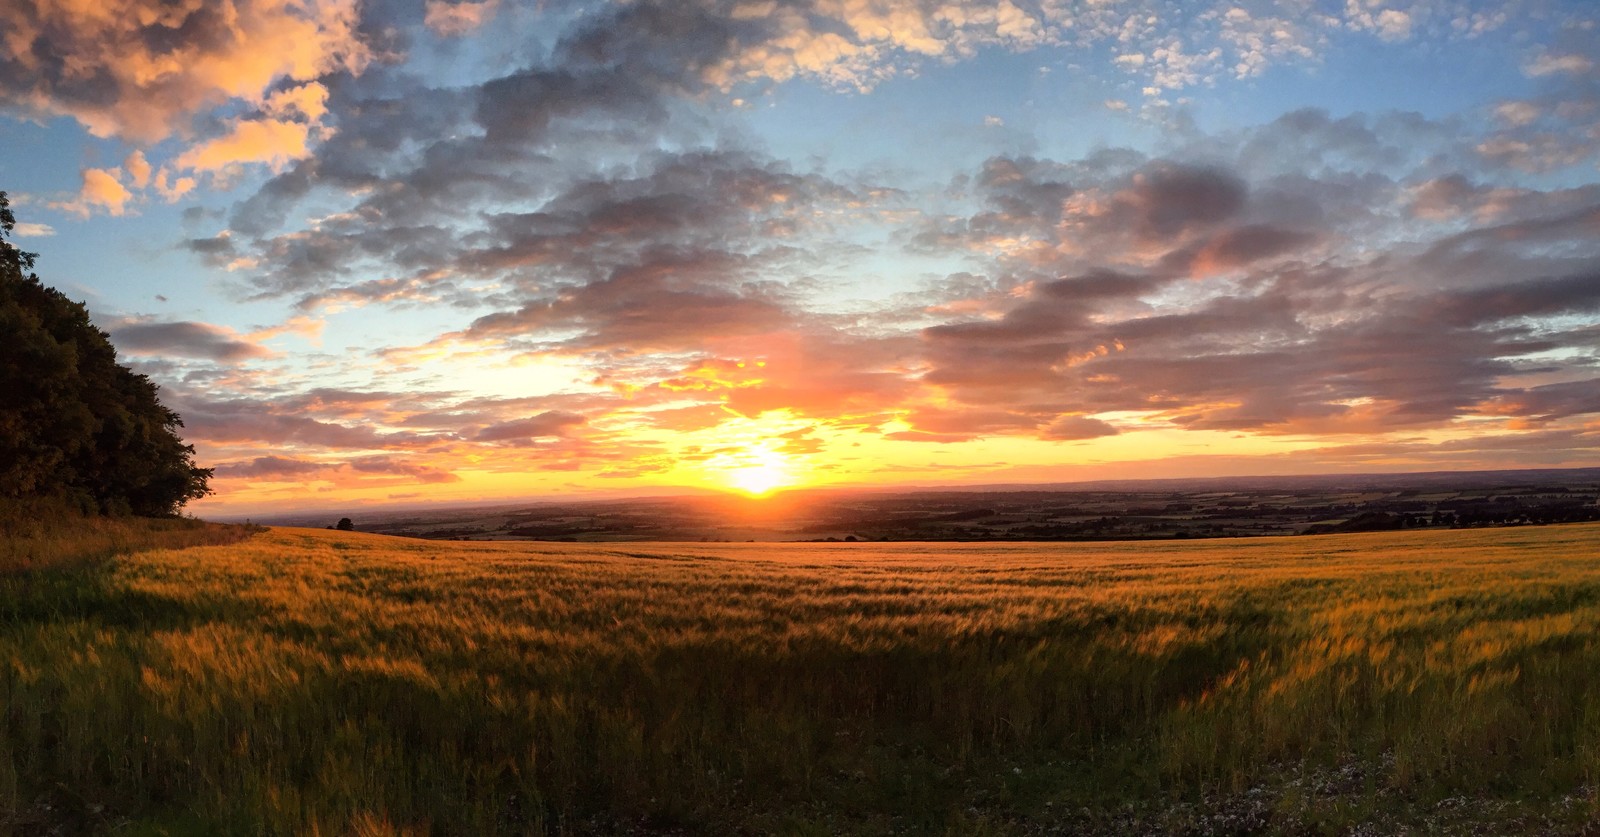 Sunset from the Wolds